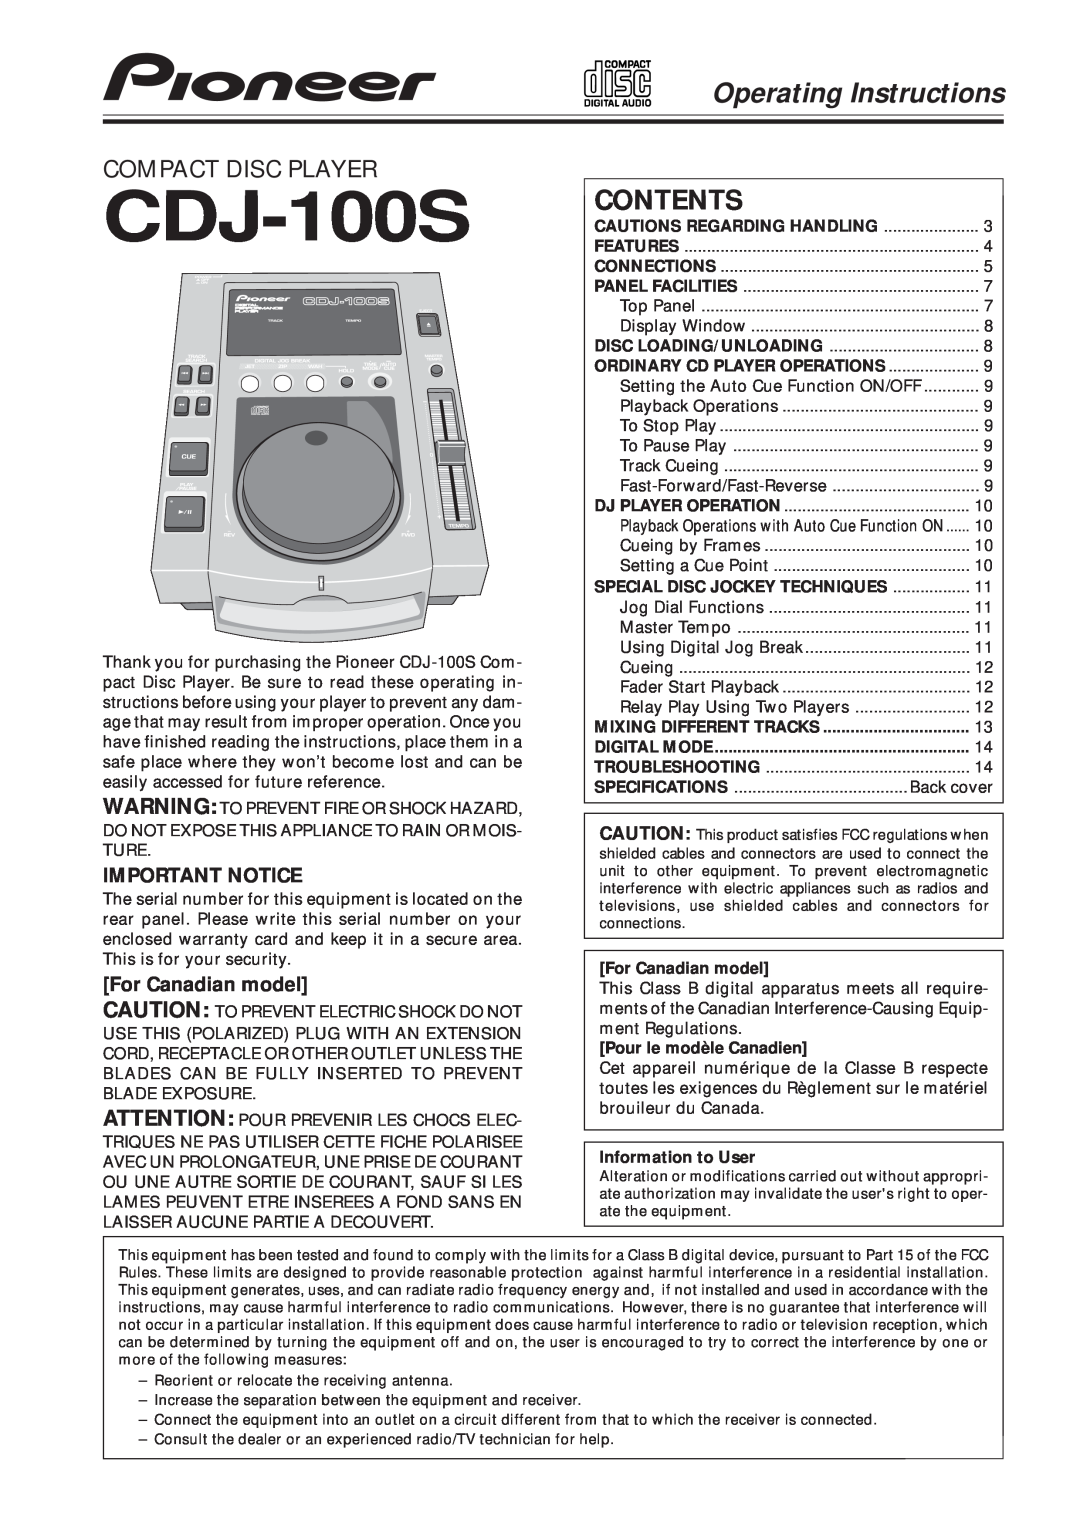 Pioneer CDJ-100S specifications Contents, Compact Disc Player, Operating Instructions, Important Notice 